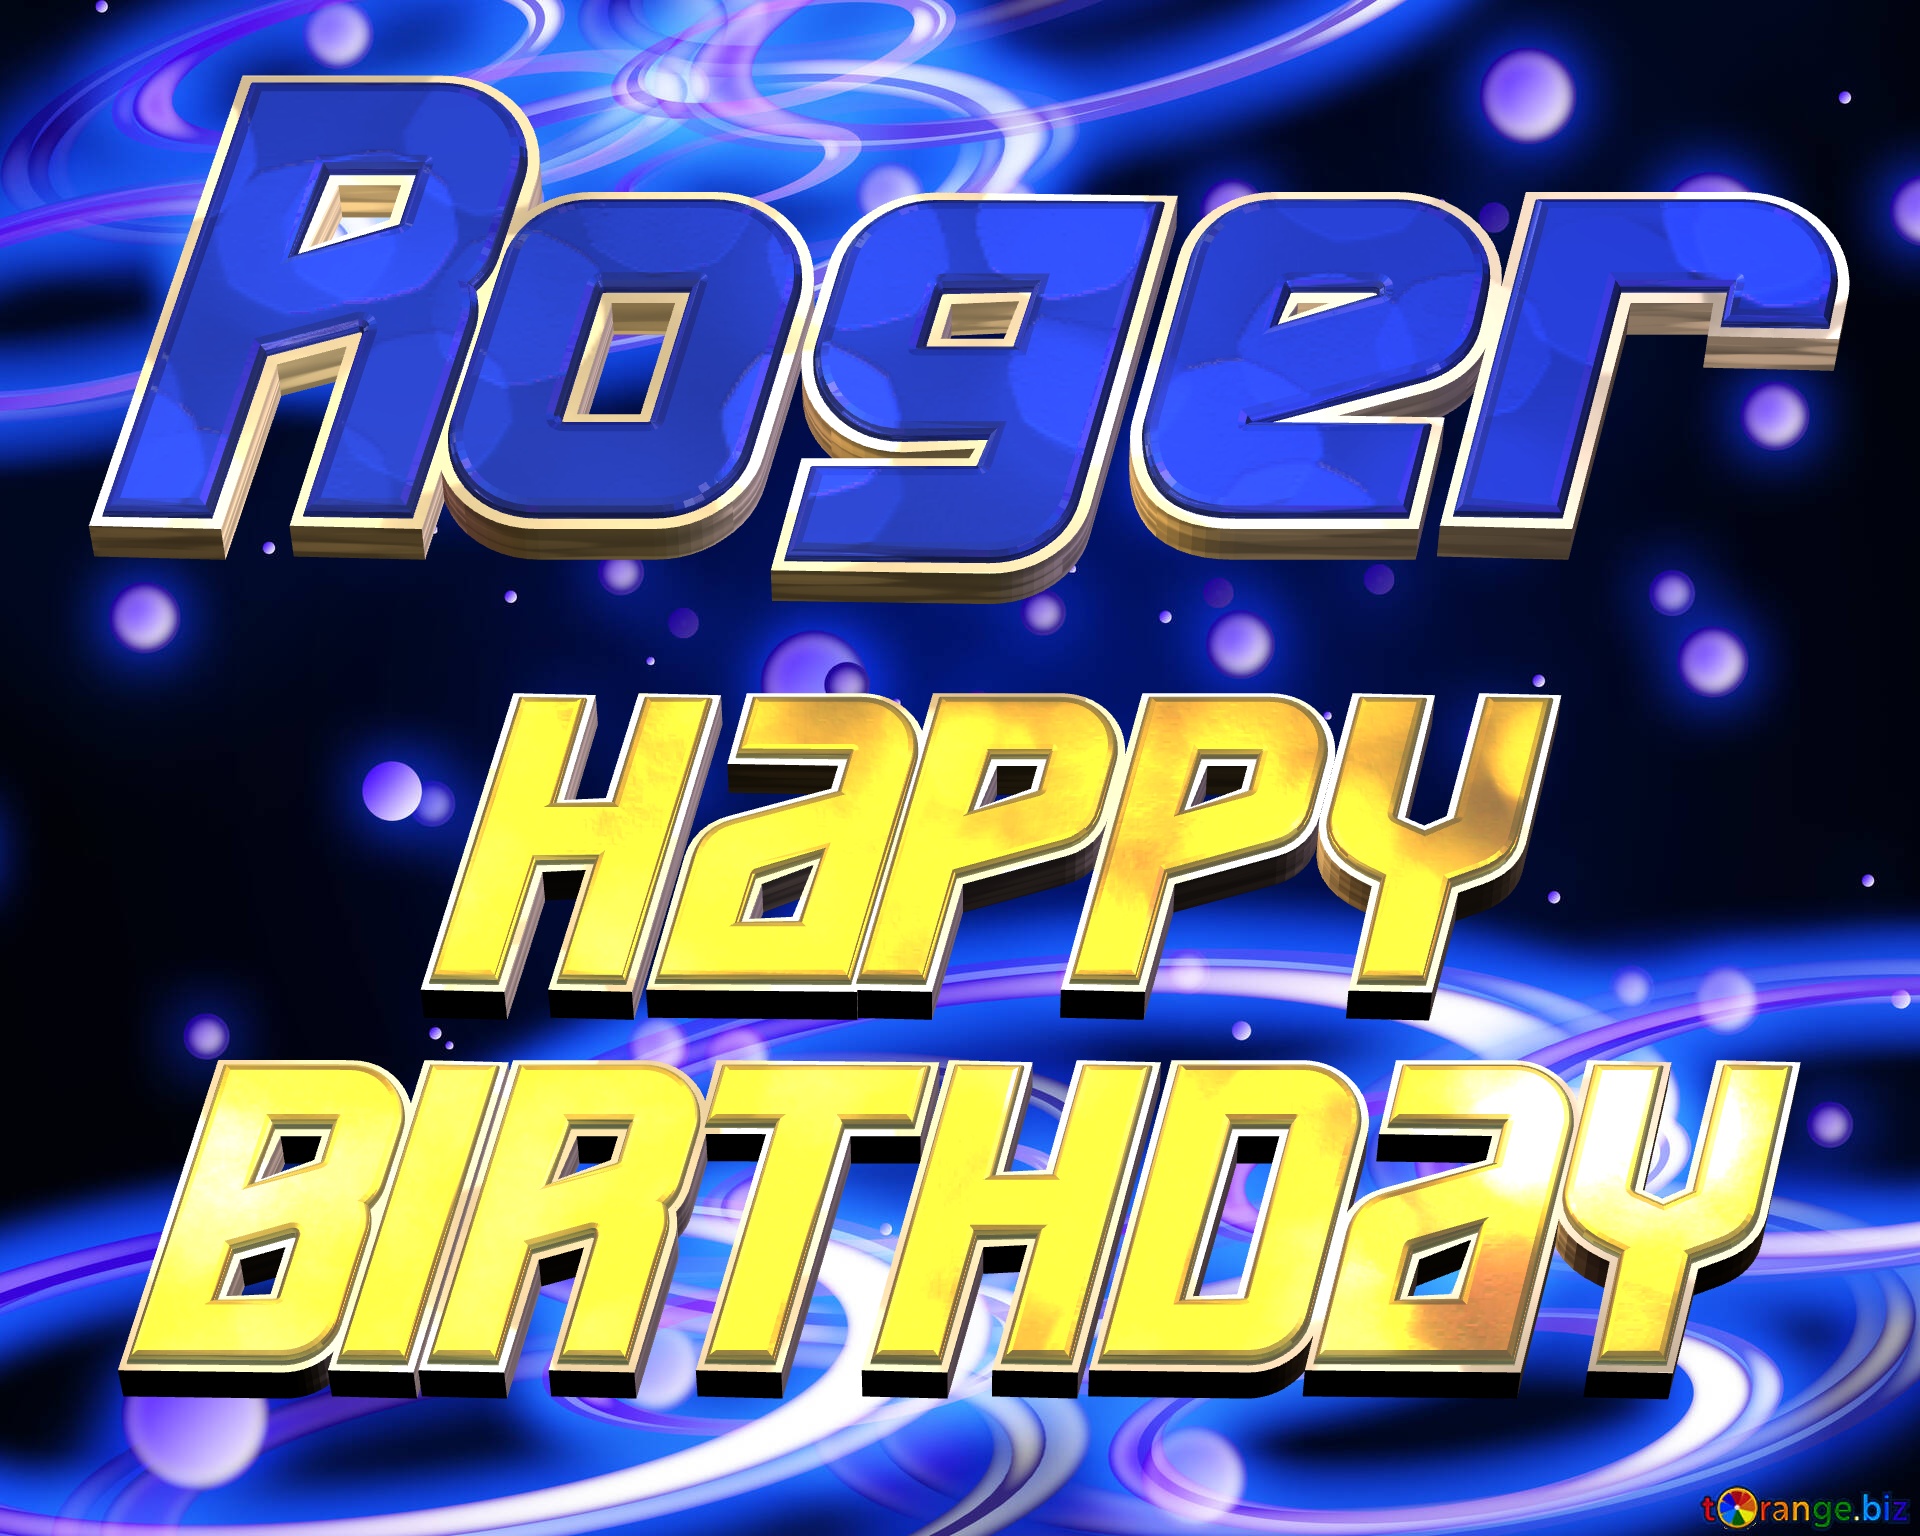 Roger Space Happy Birthday! Technology background №54919